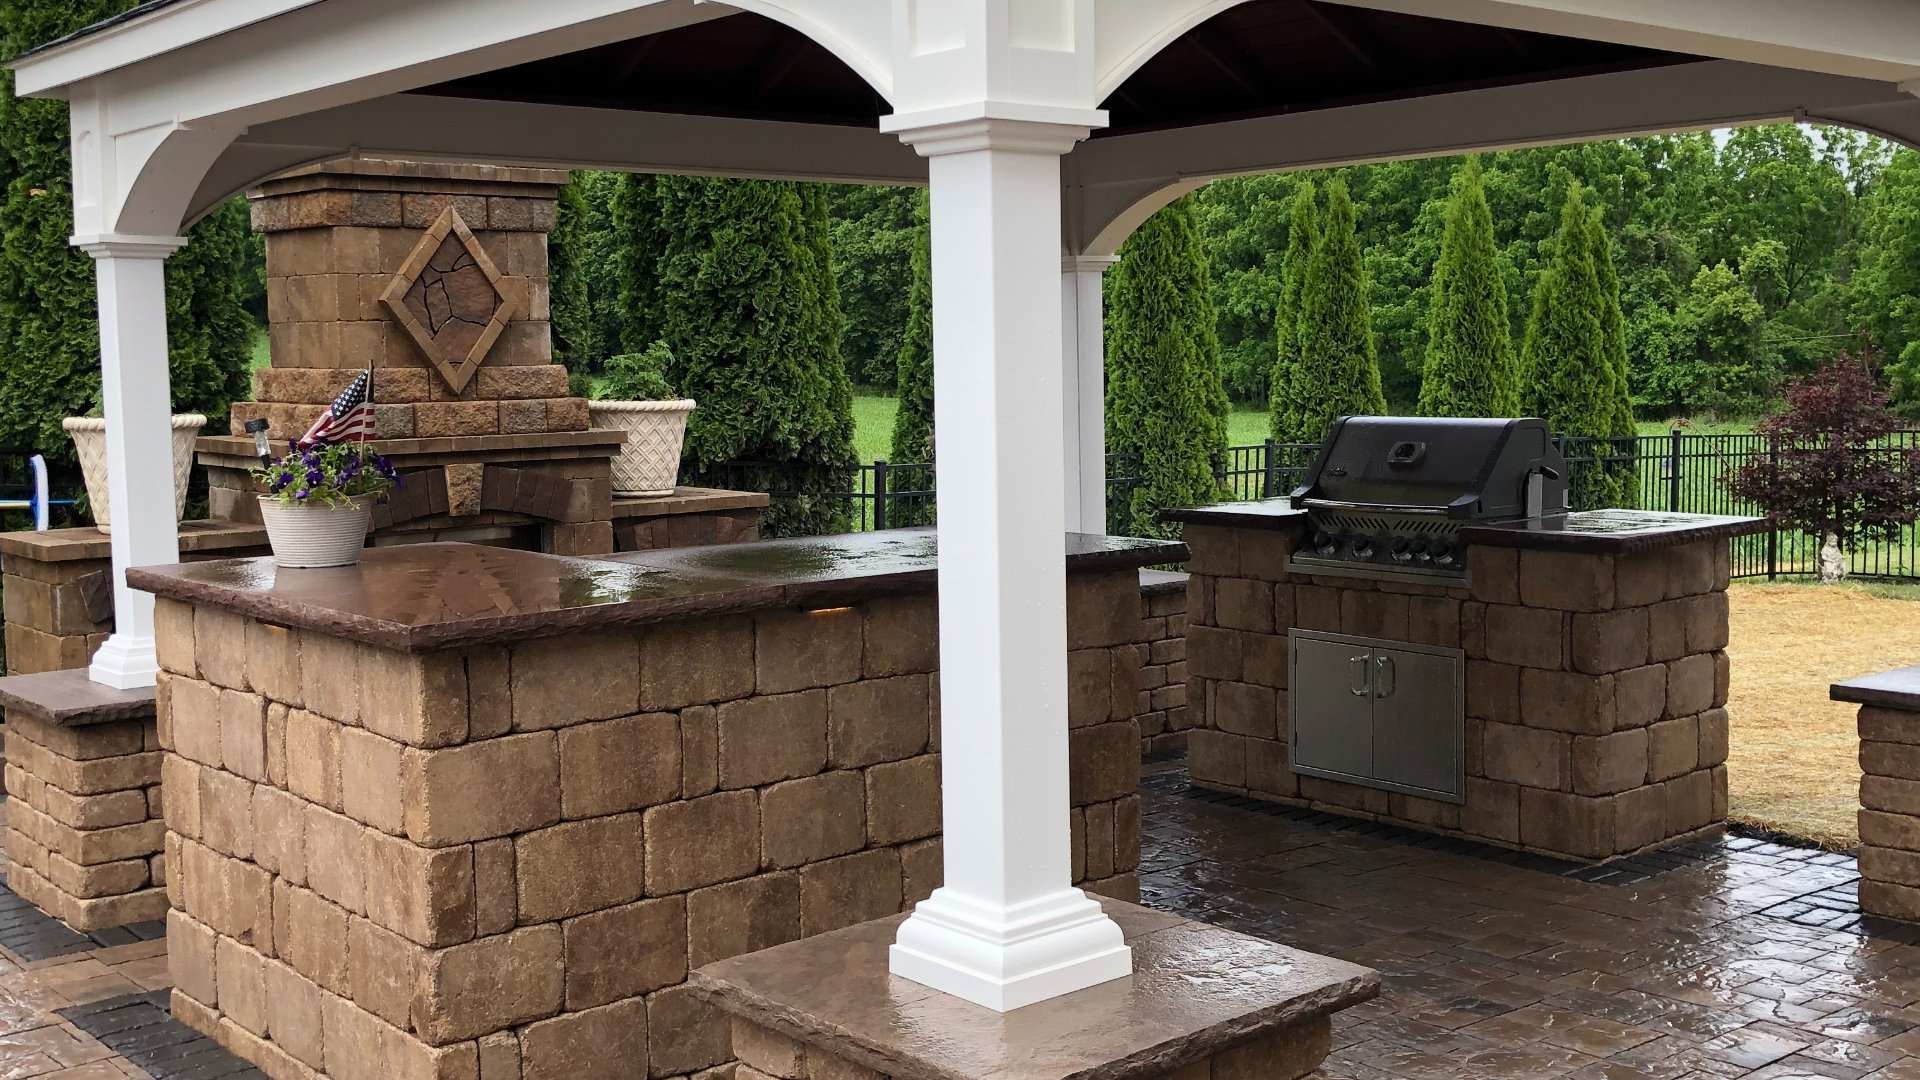 Kit vs Custom Outdoor Kitchens: Which One Is Right for You?